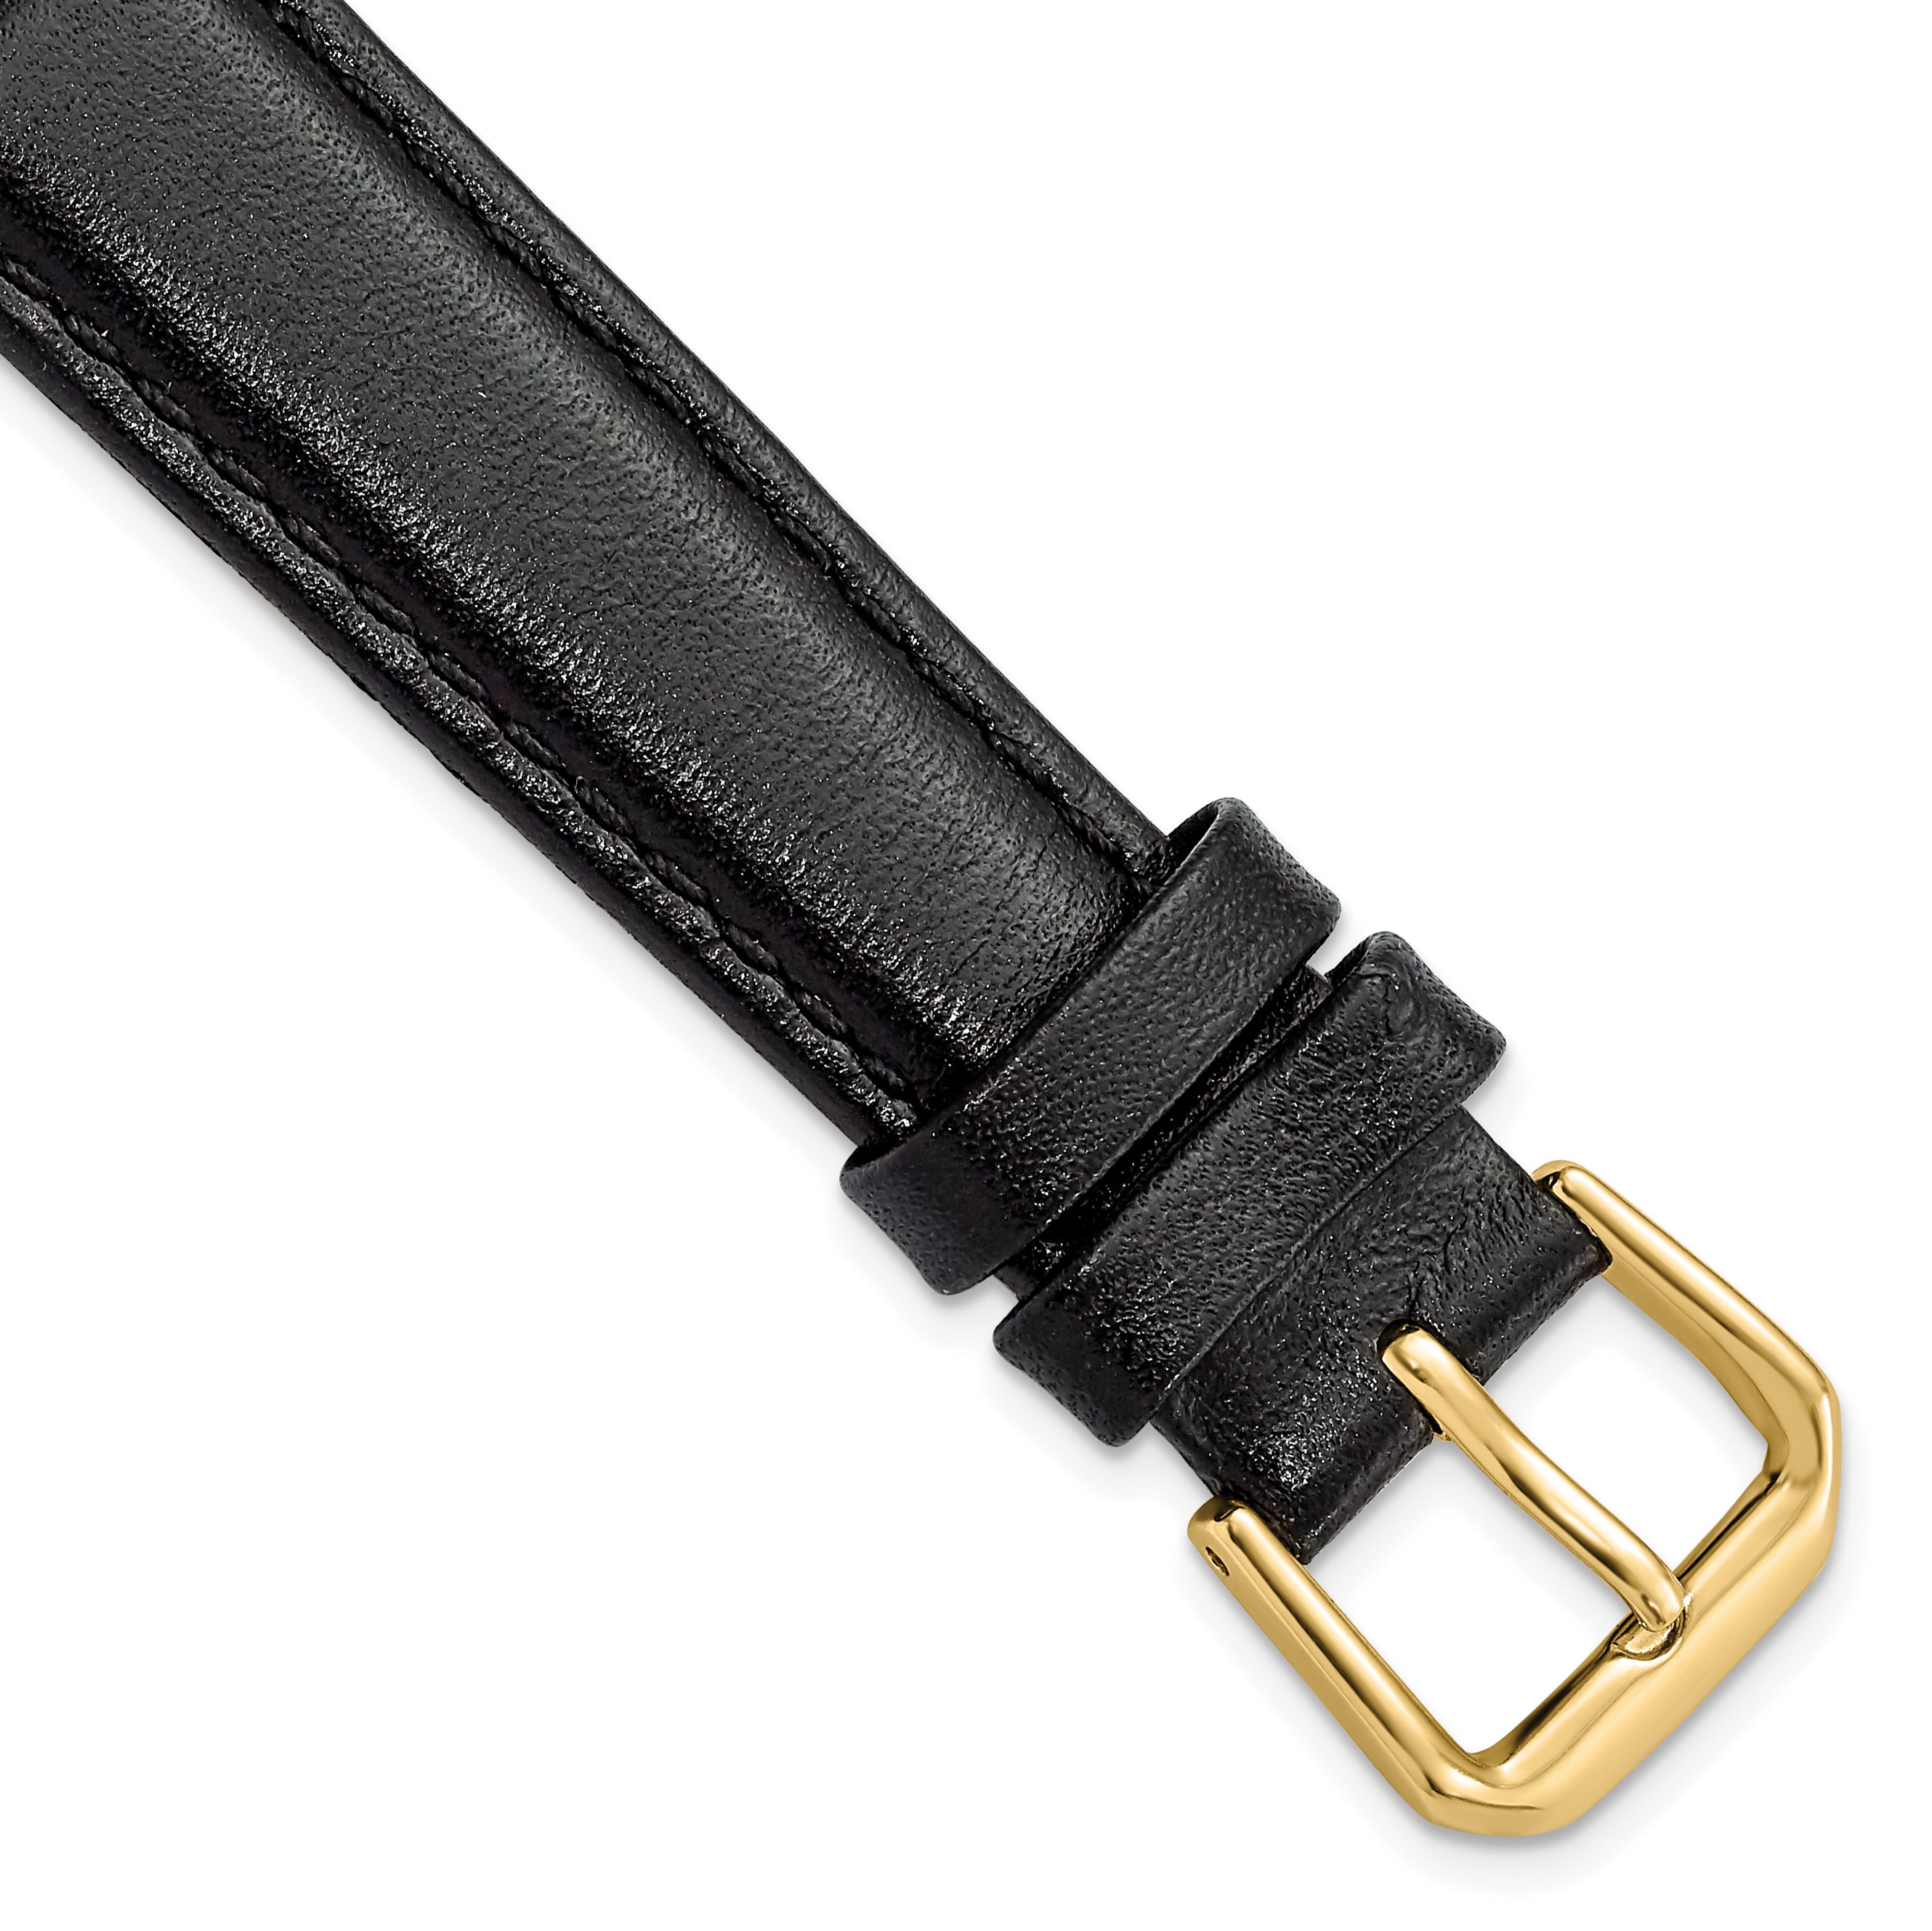 DeBeer 16mm Short Black Smooth Leather with Gold-tone Buckle 6.75 inch Watch Band